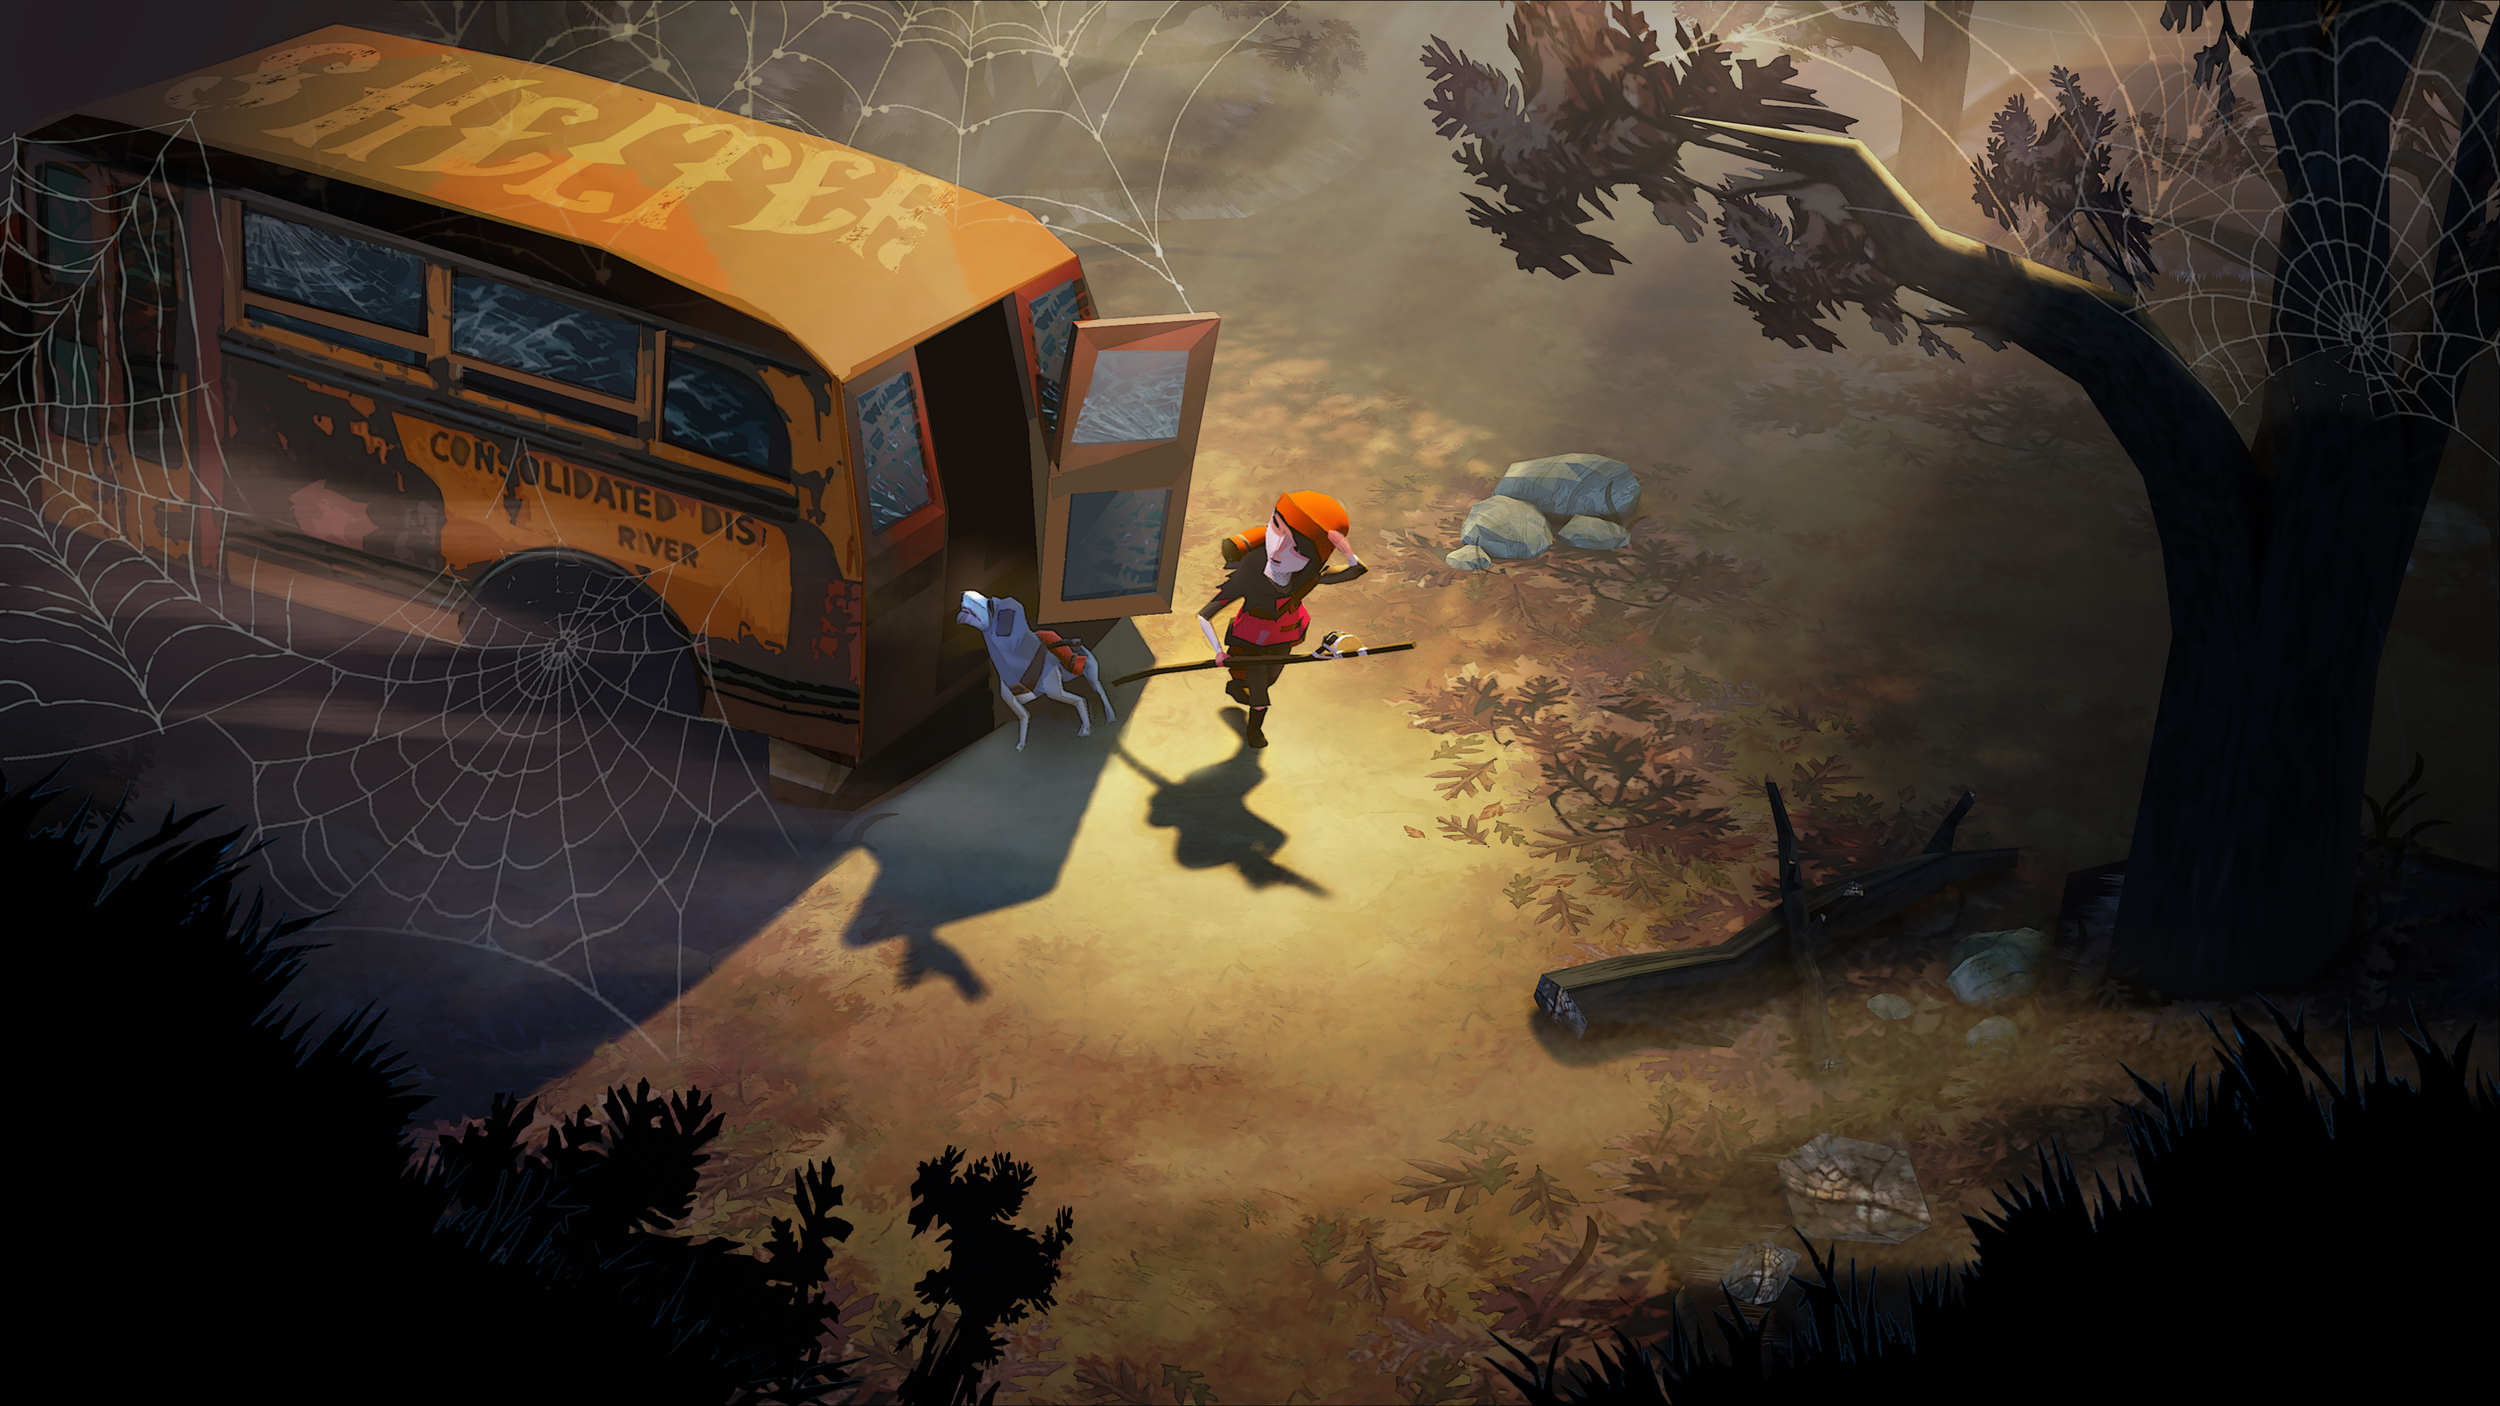 3. The Flame of the Flood